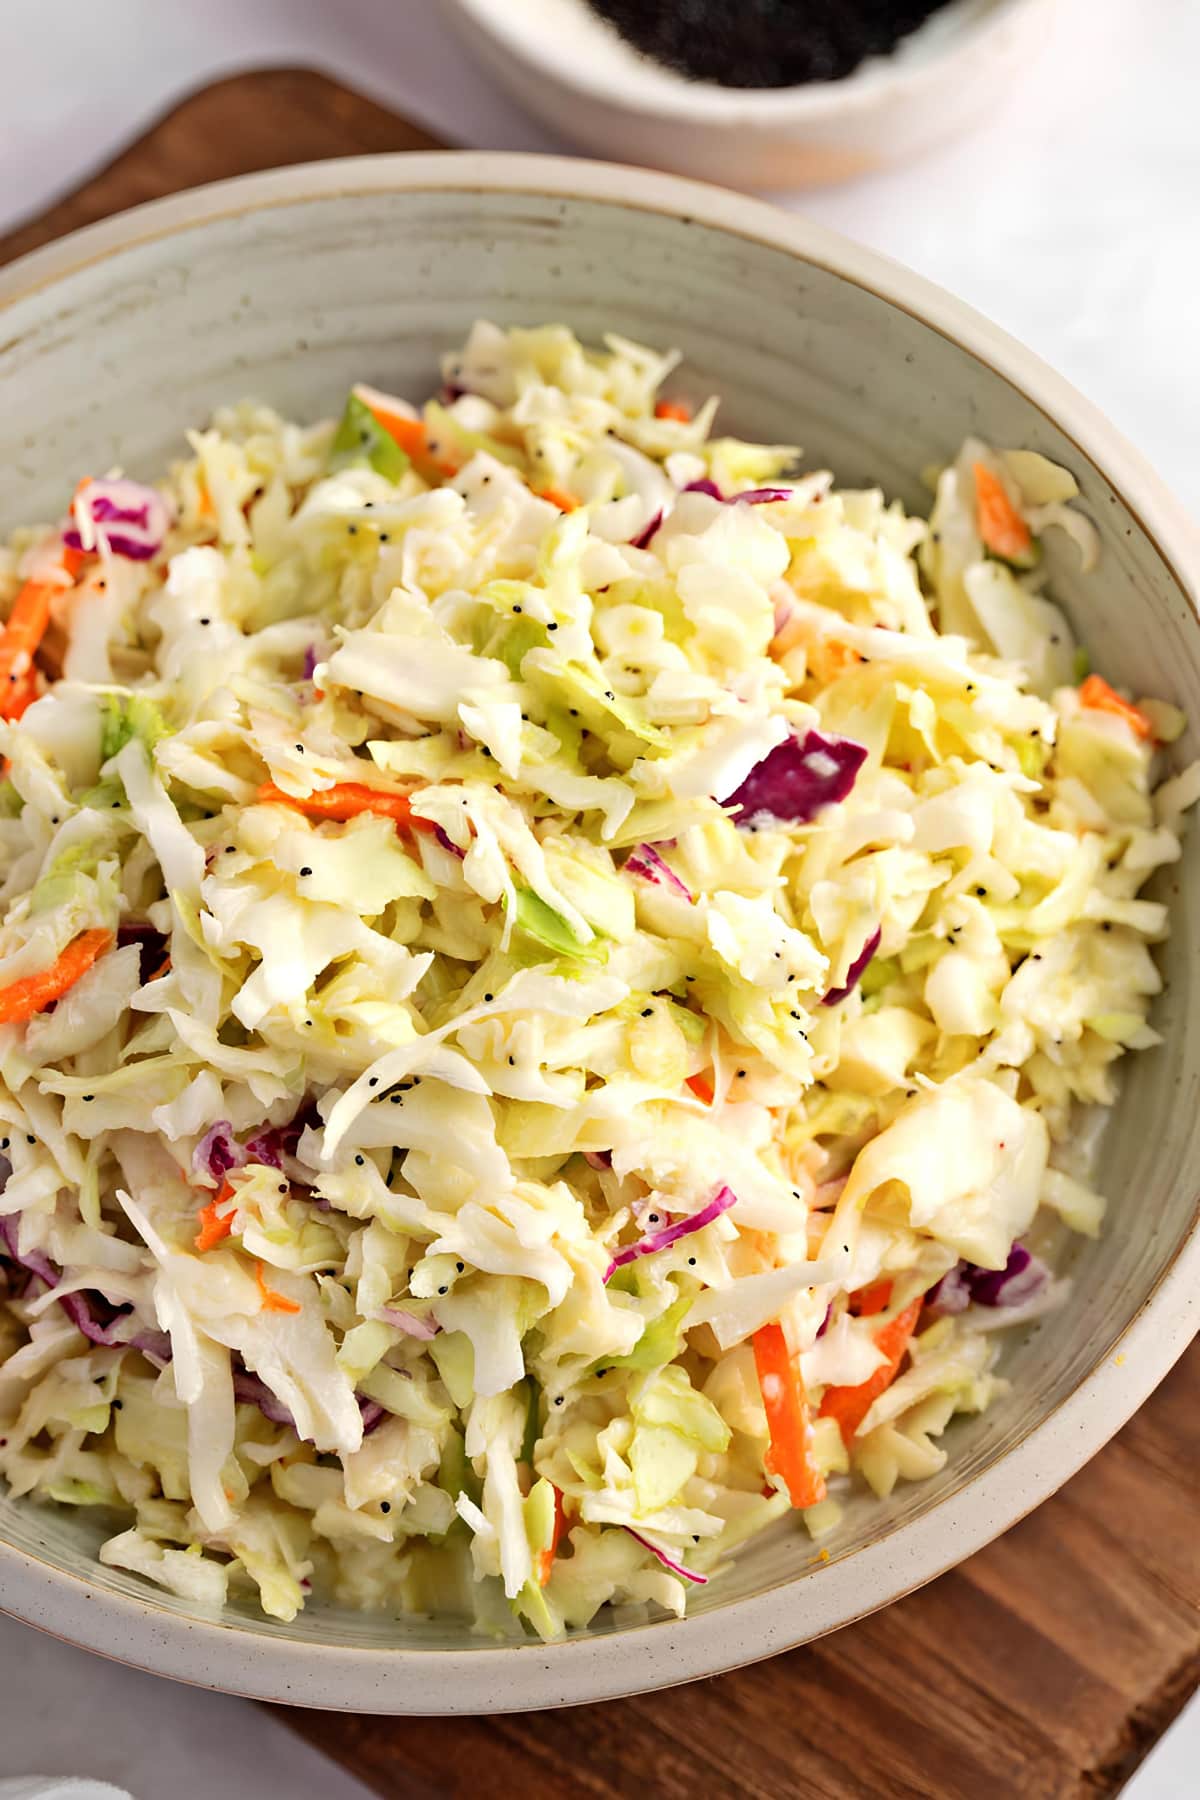 Coleslaw mix with dressing and poppy seeds on bowl.